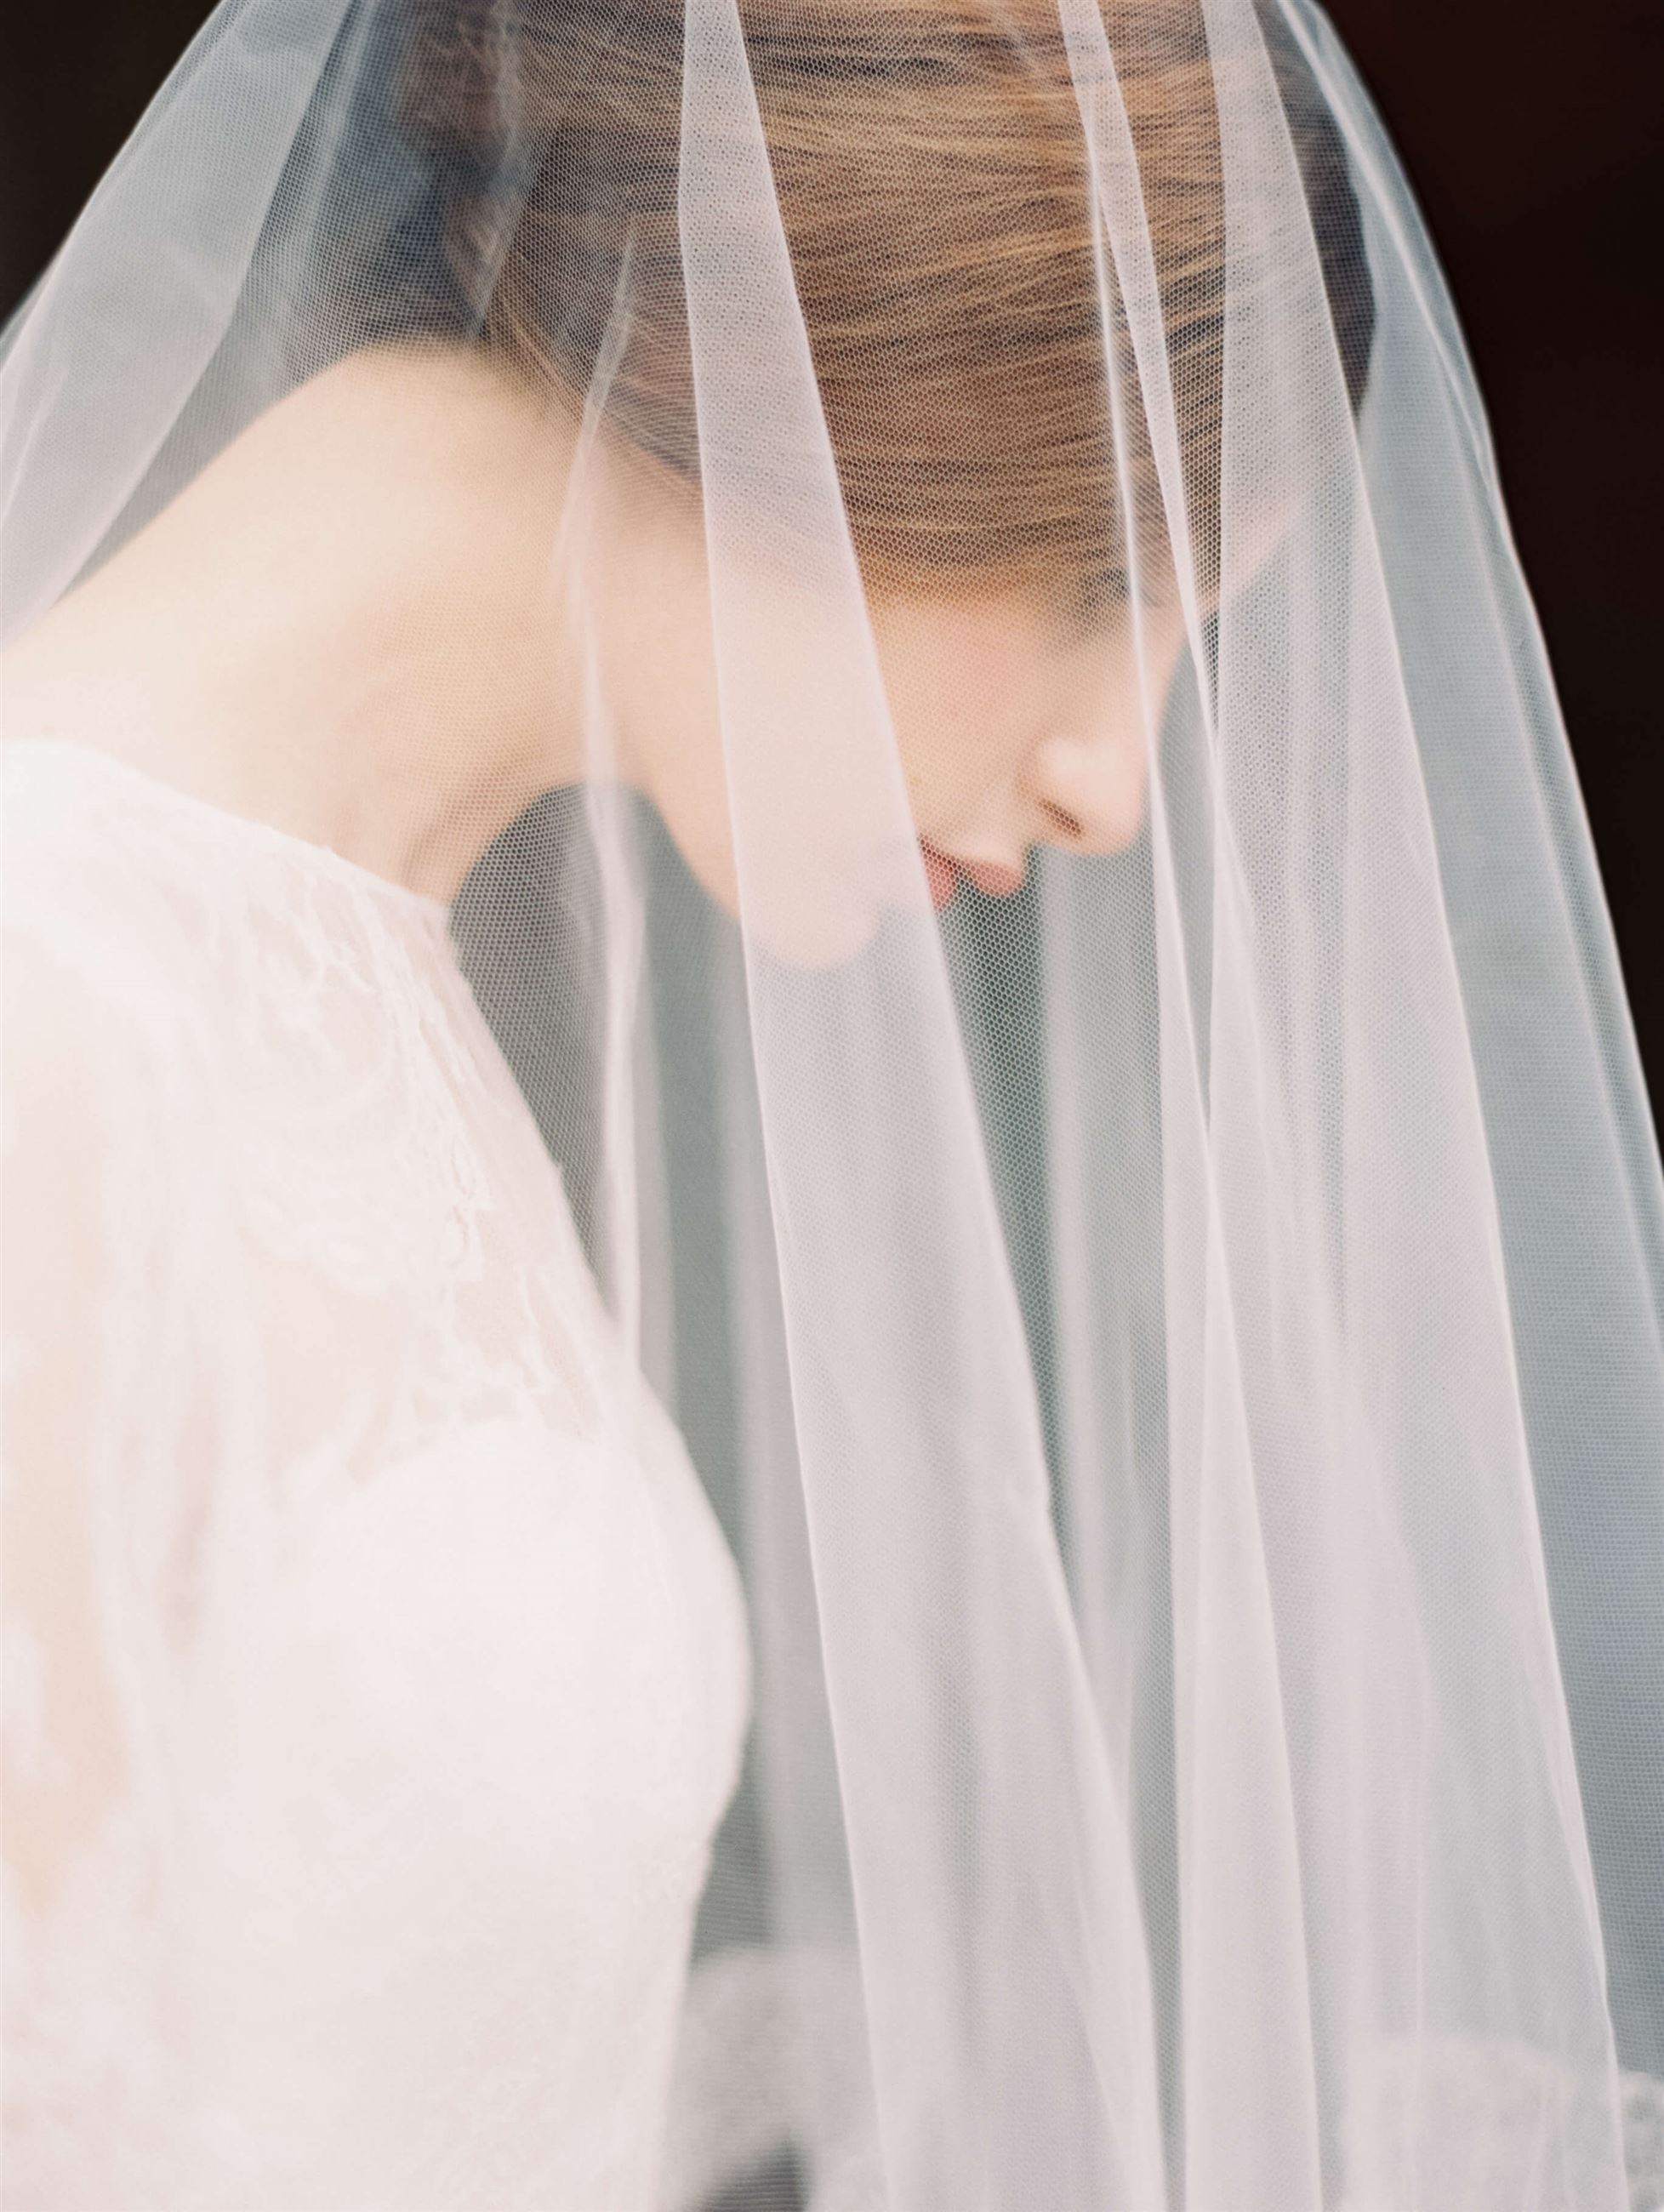 Photo of the model wearing white bridal gown under the veil